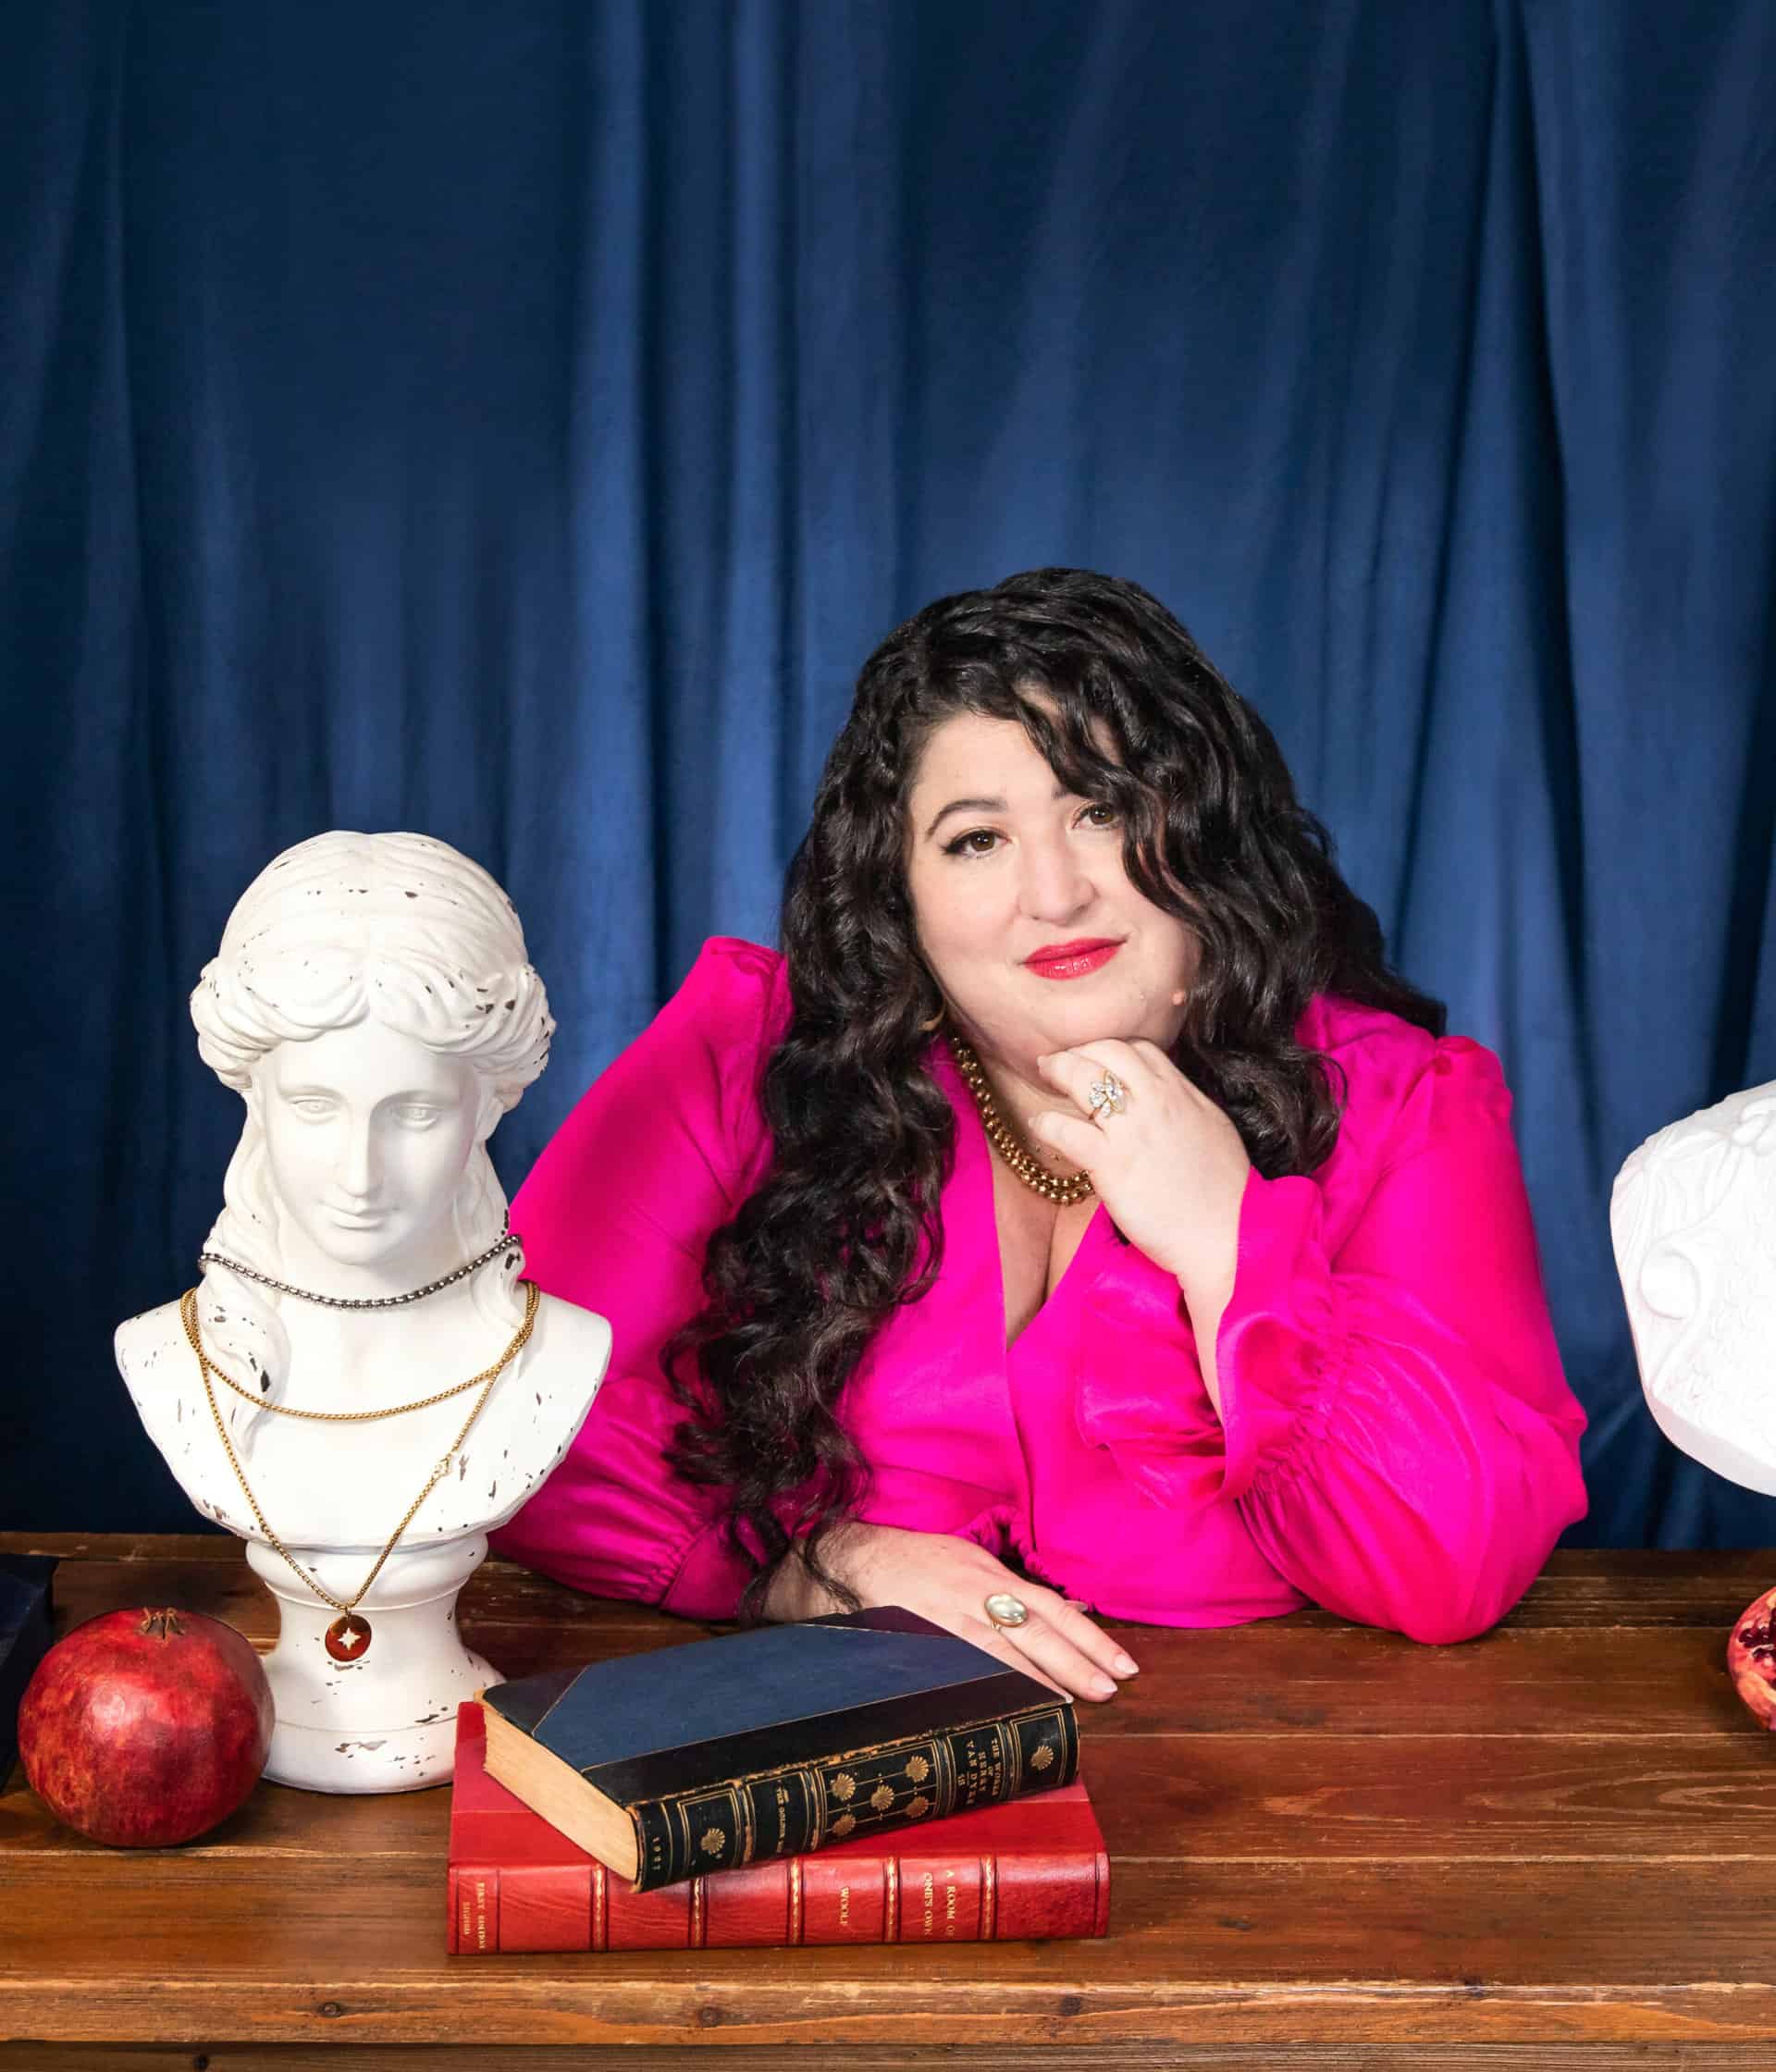 Kara Loewentheil sitting at a table with a sculpture bust, books and pomegranates.